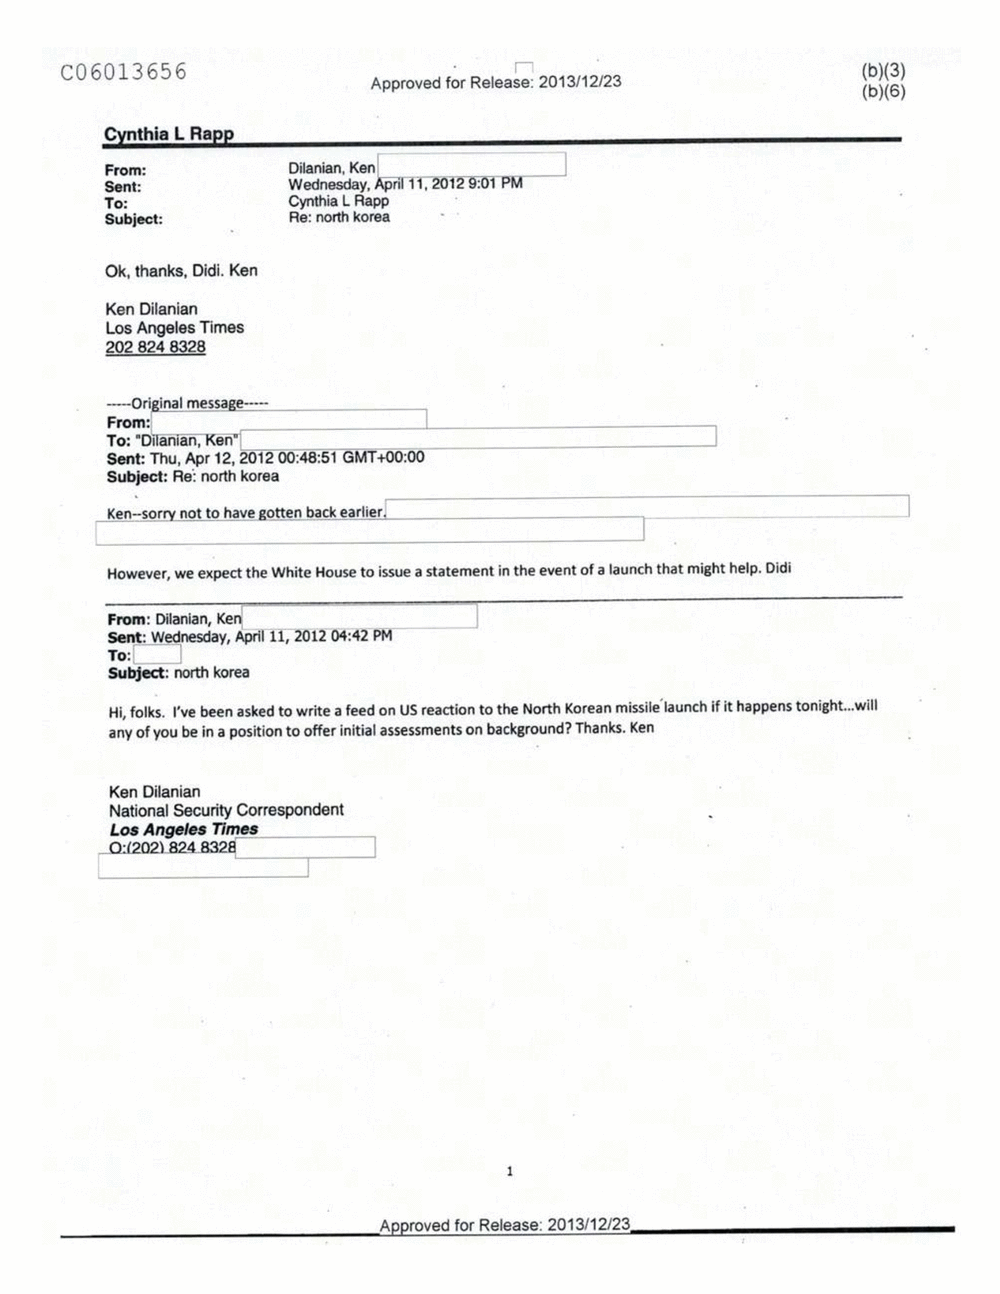 Page 506 from Email Correspondence Between Reporters and CIA Flacks